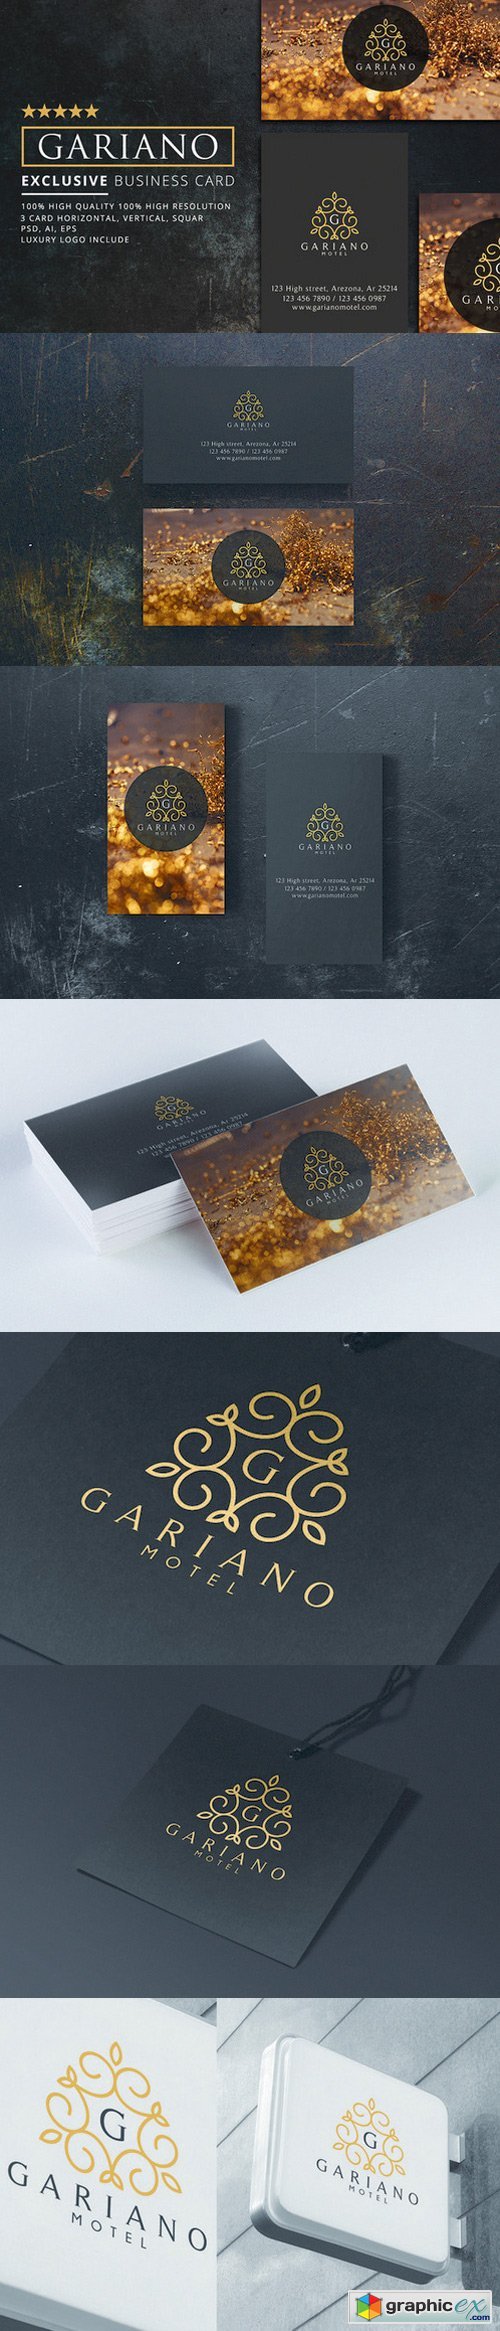 Gariano Luxury Business Card 3 in 1